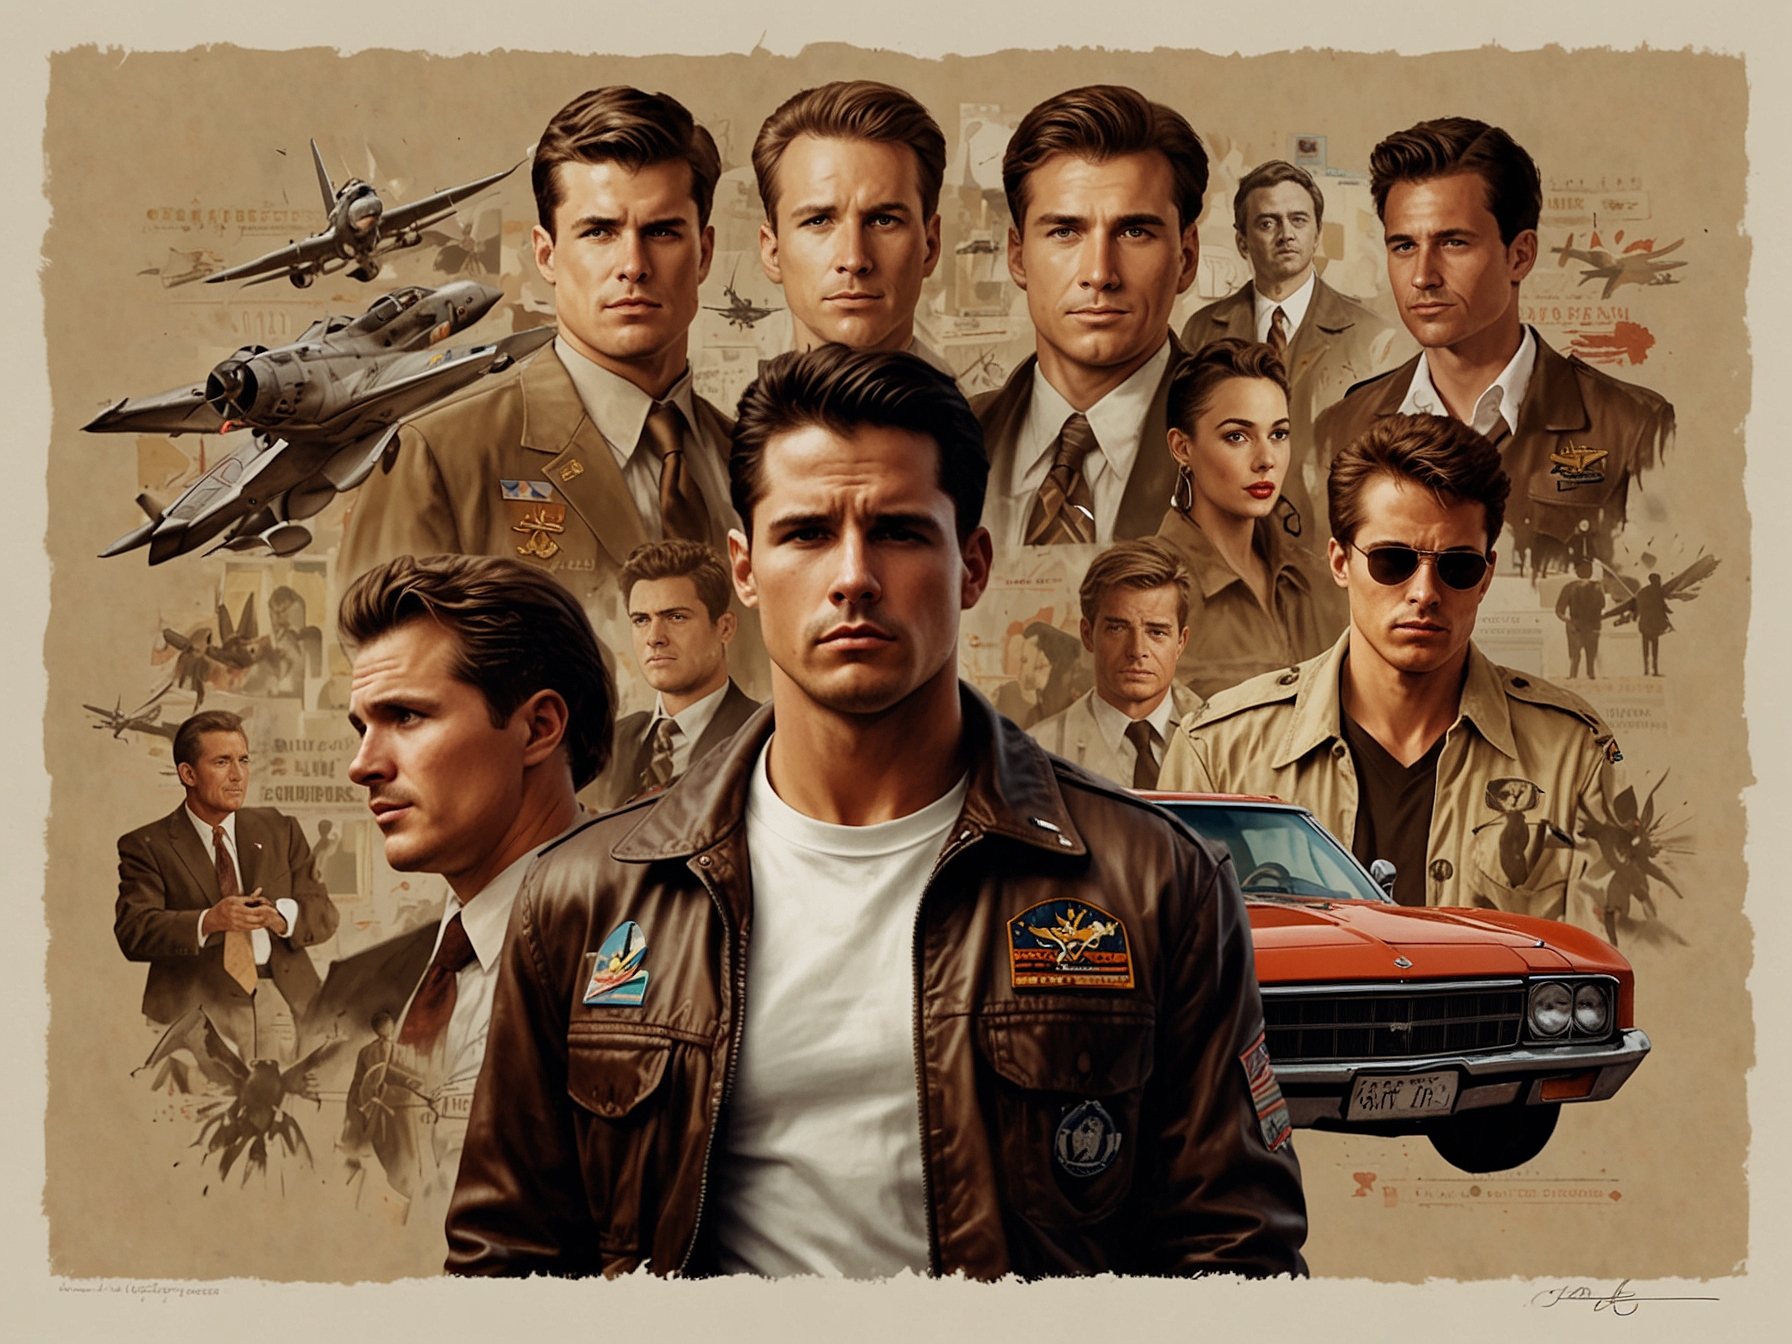 A captivating collage featuring iconic scenes from various movies in the list, including Top Gun: Maverick, The Godfather, Shawshank Redemption, and others, showcasing the diversity and excellence in cinema.